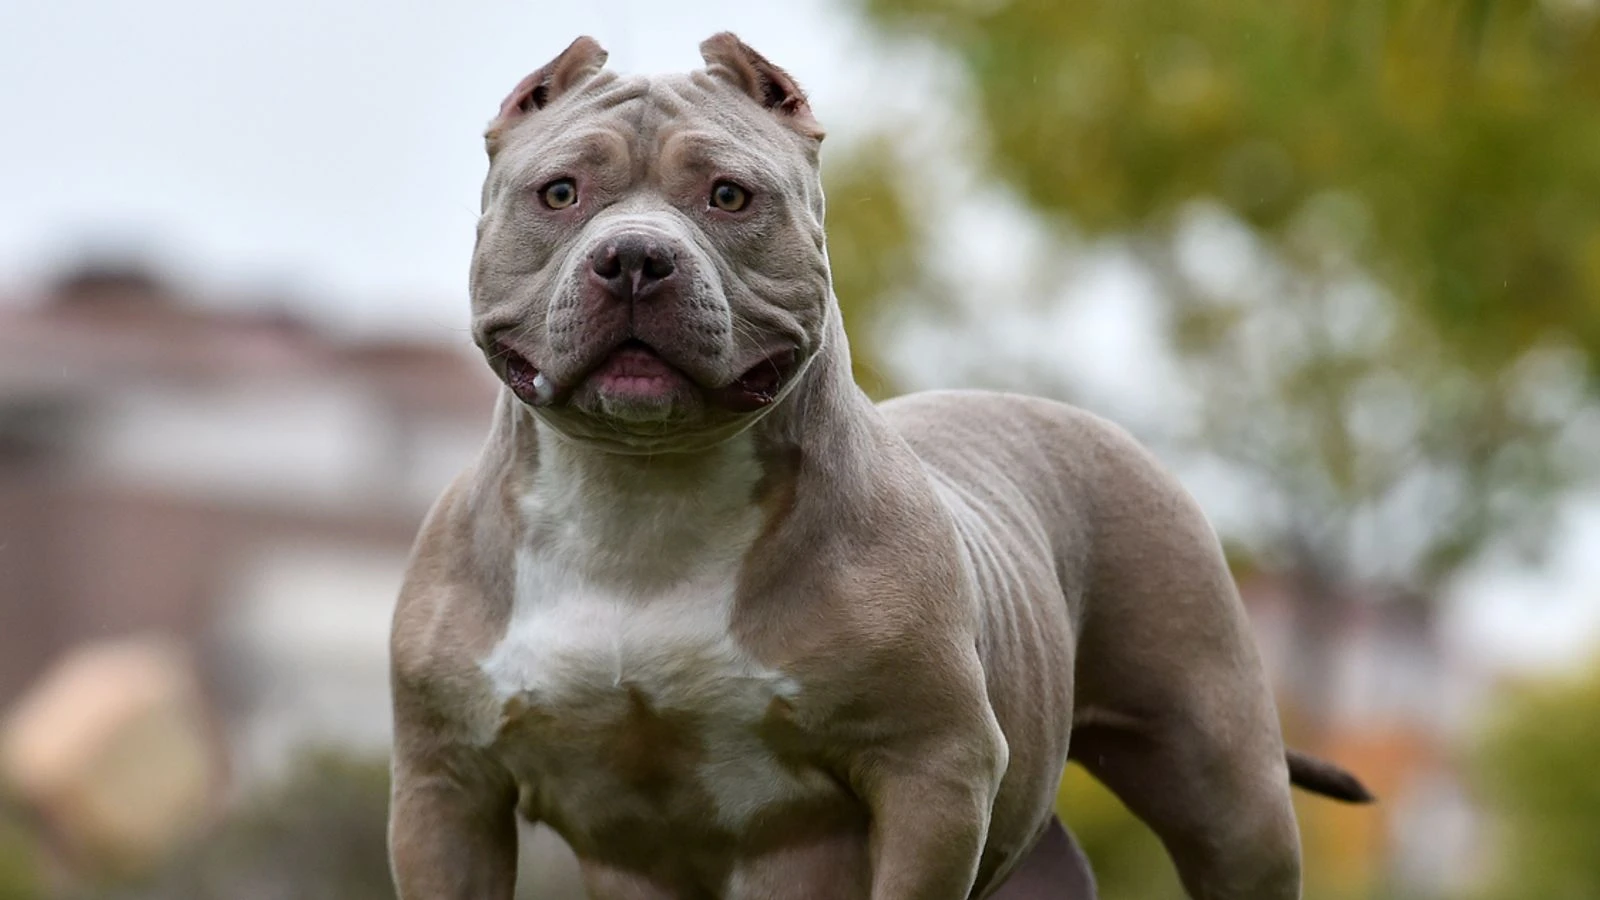 XL Bully breed to be banned in the UK